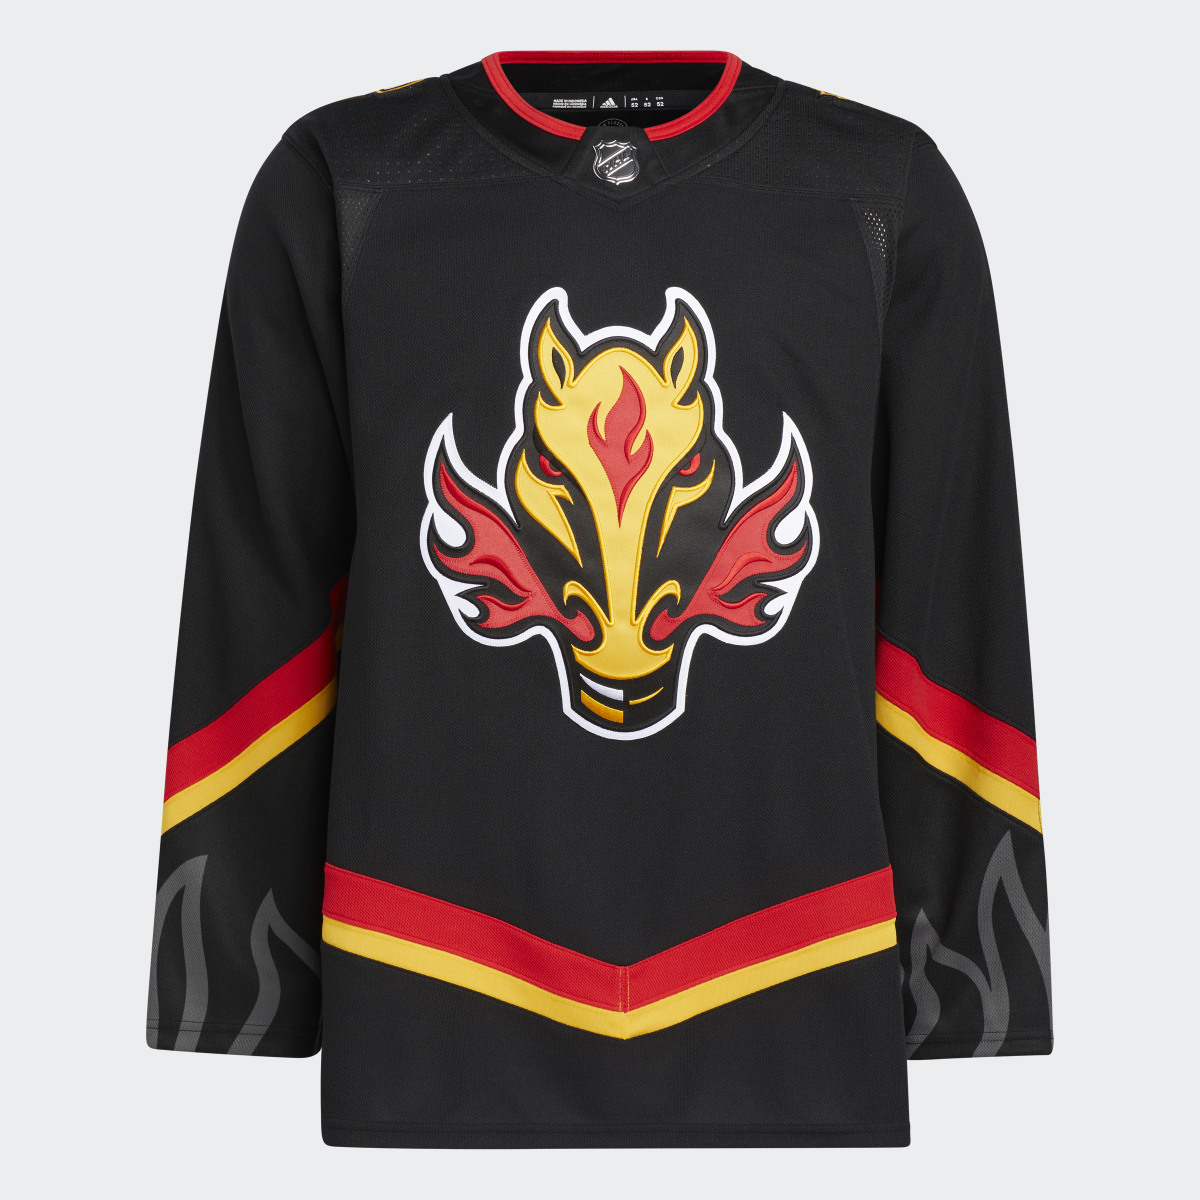 Adidas Flames Third Authentic Jersey. 5